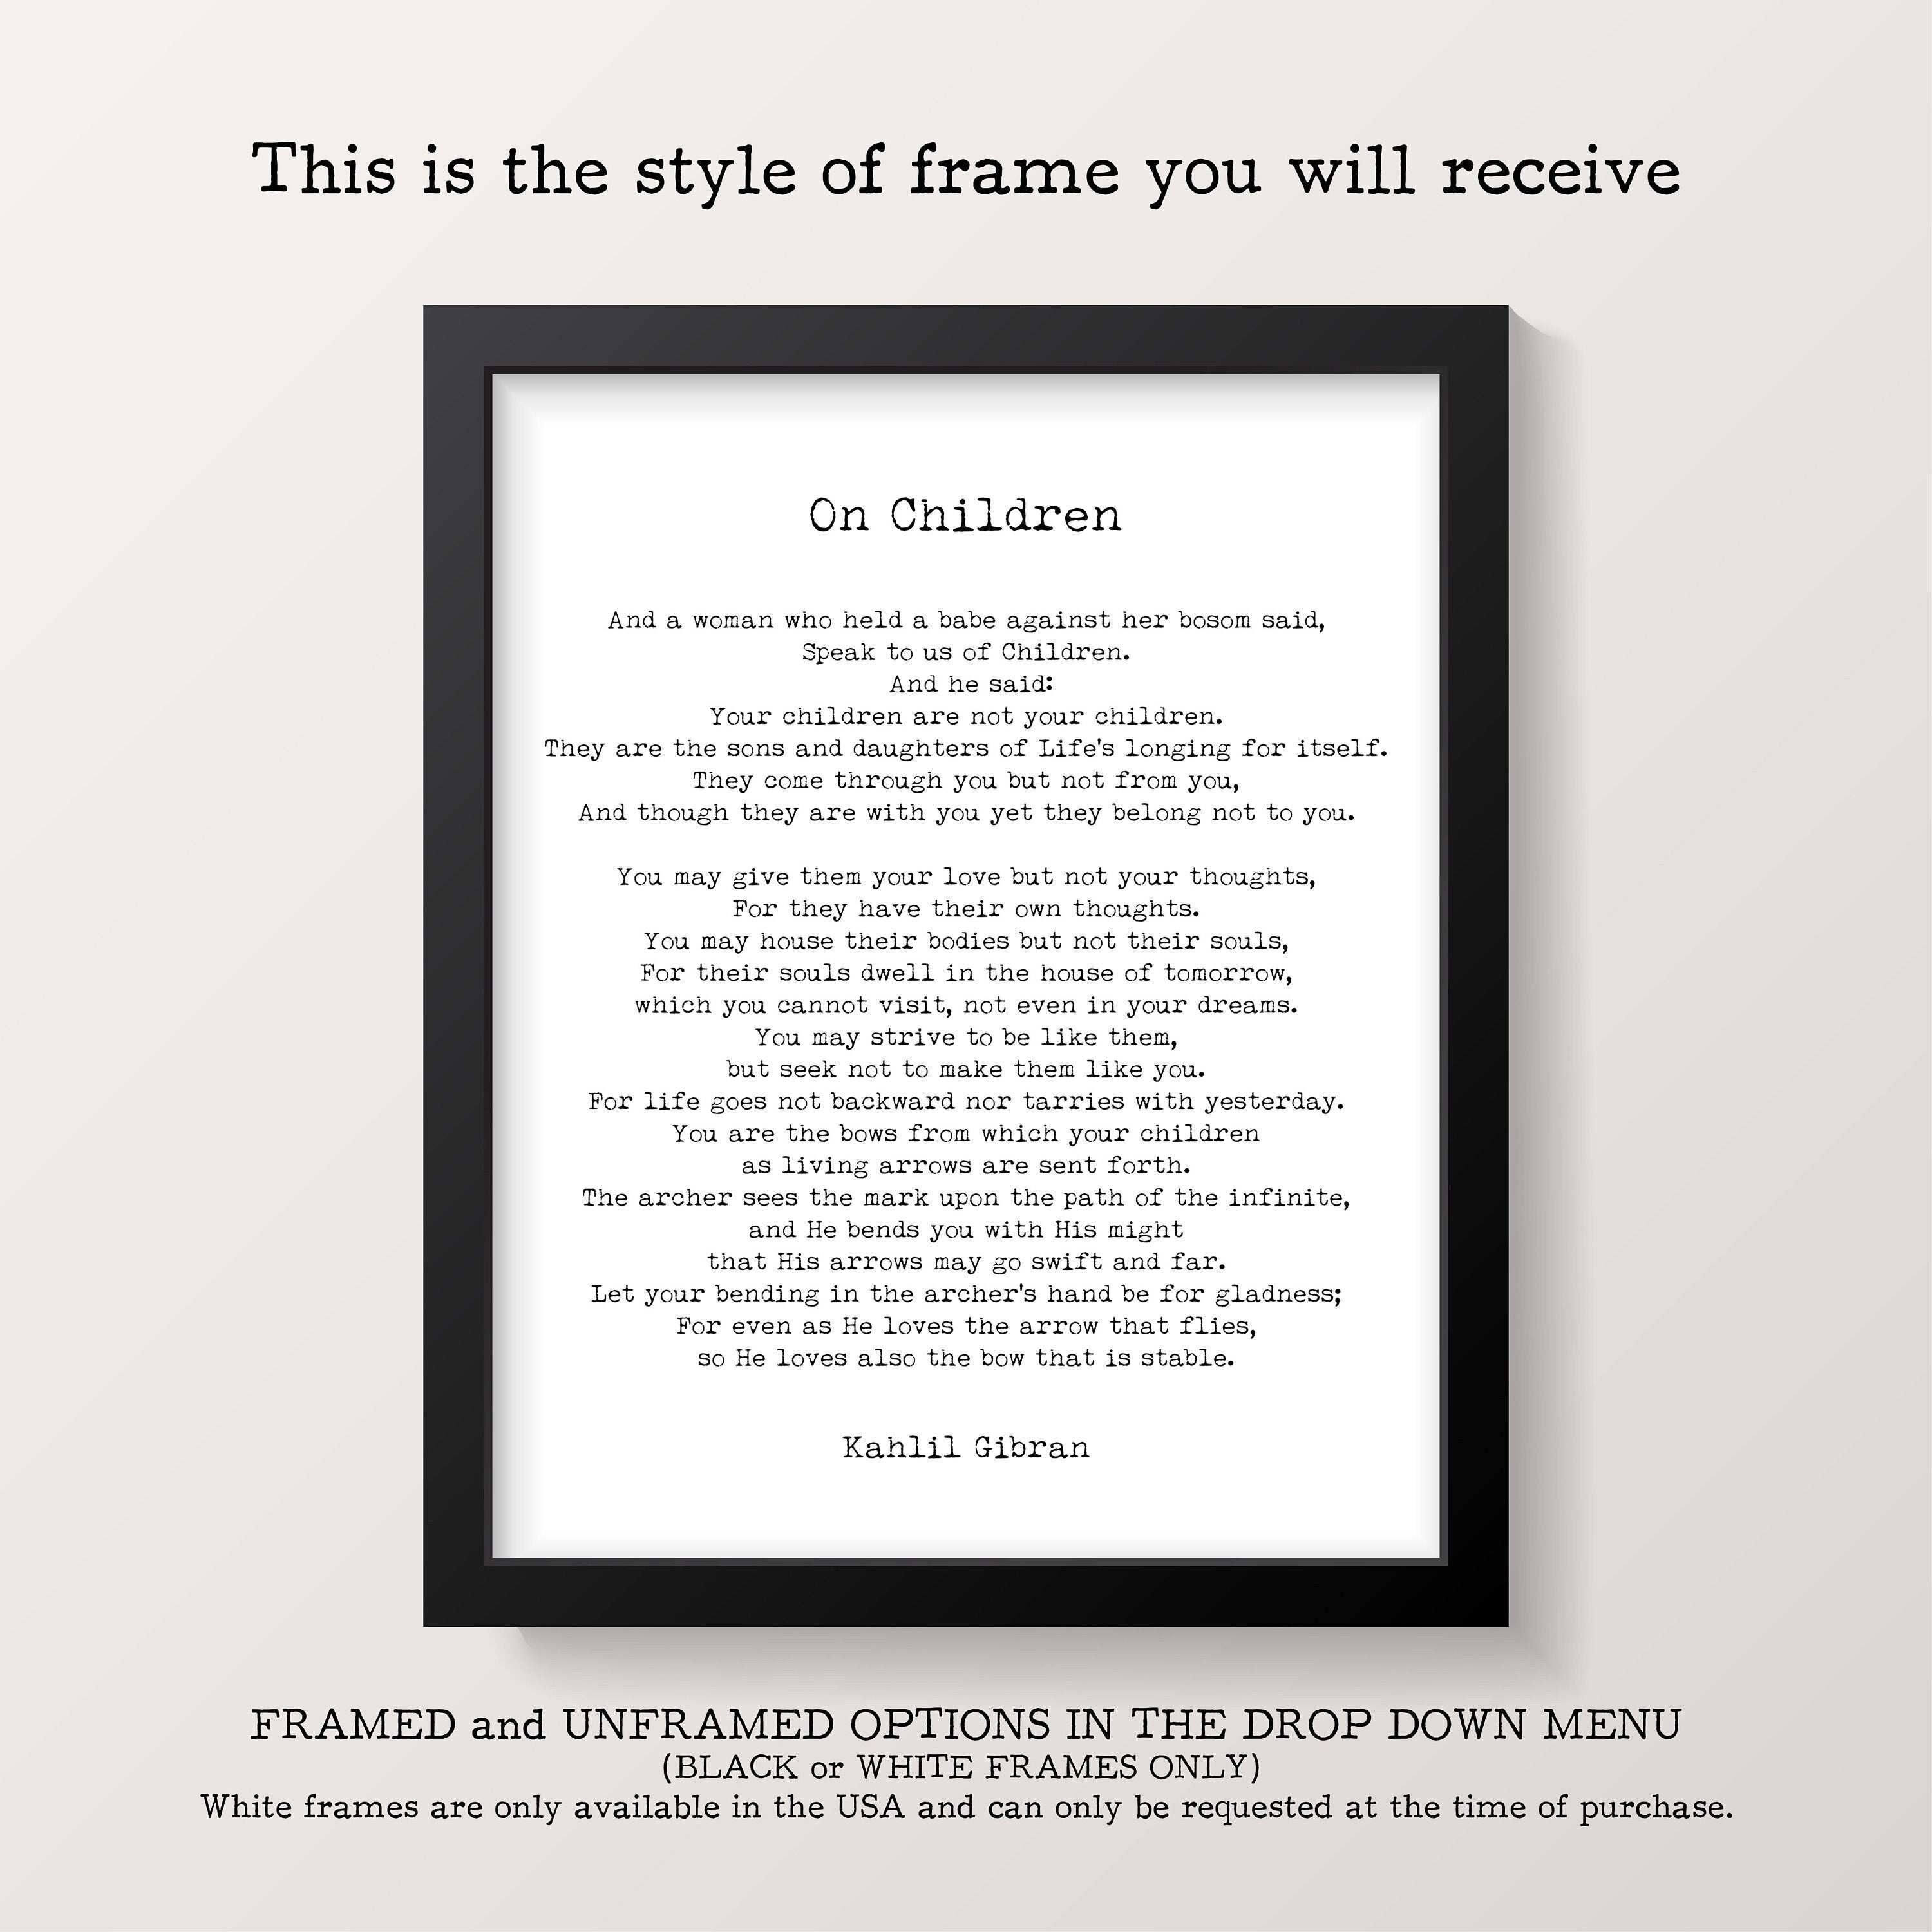 Twenty Years From Now Travel Decor Inspirational Quote Print, Explore Dream Discover Mark Twain Unframed & Framed Art Print